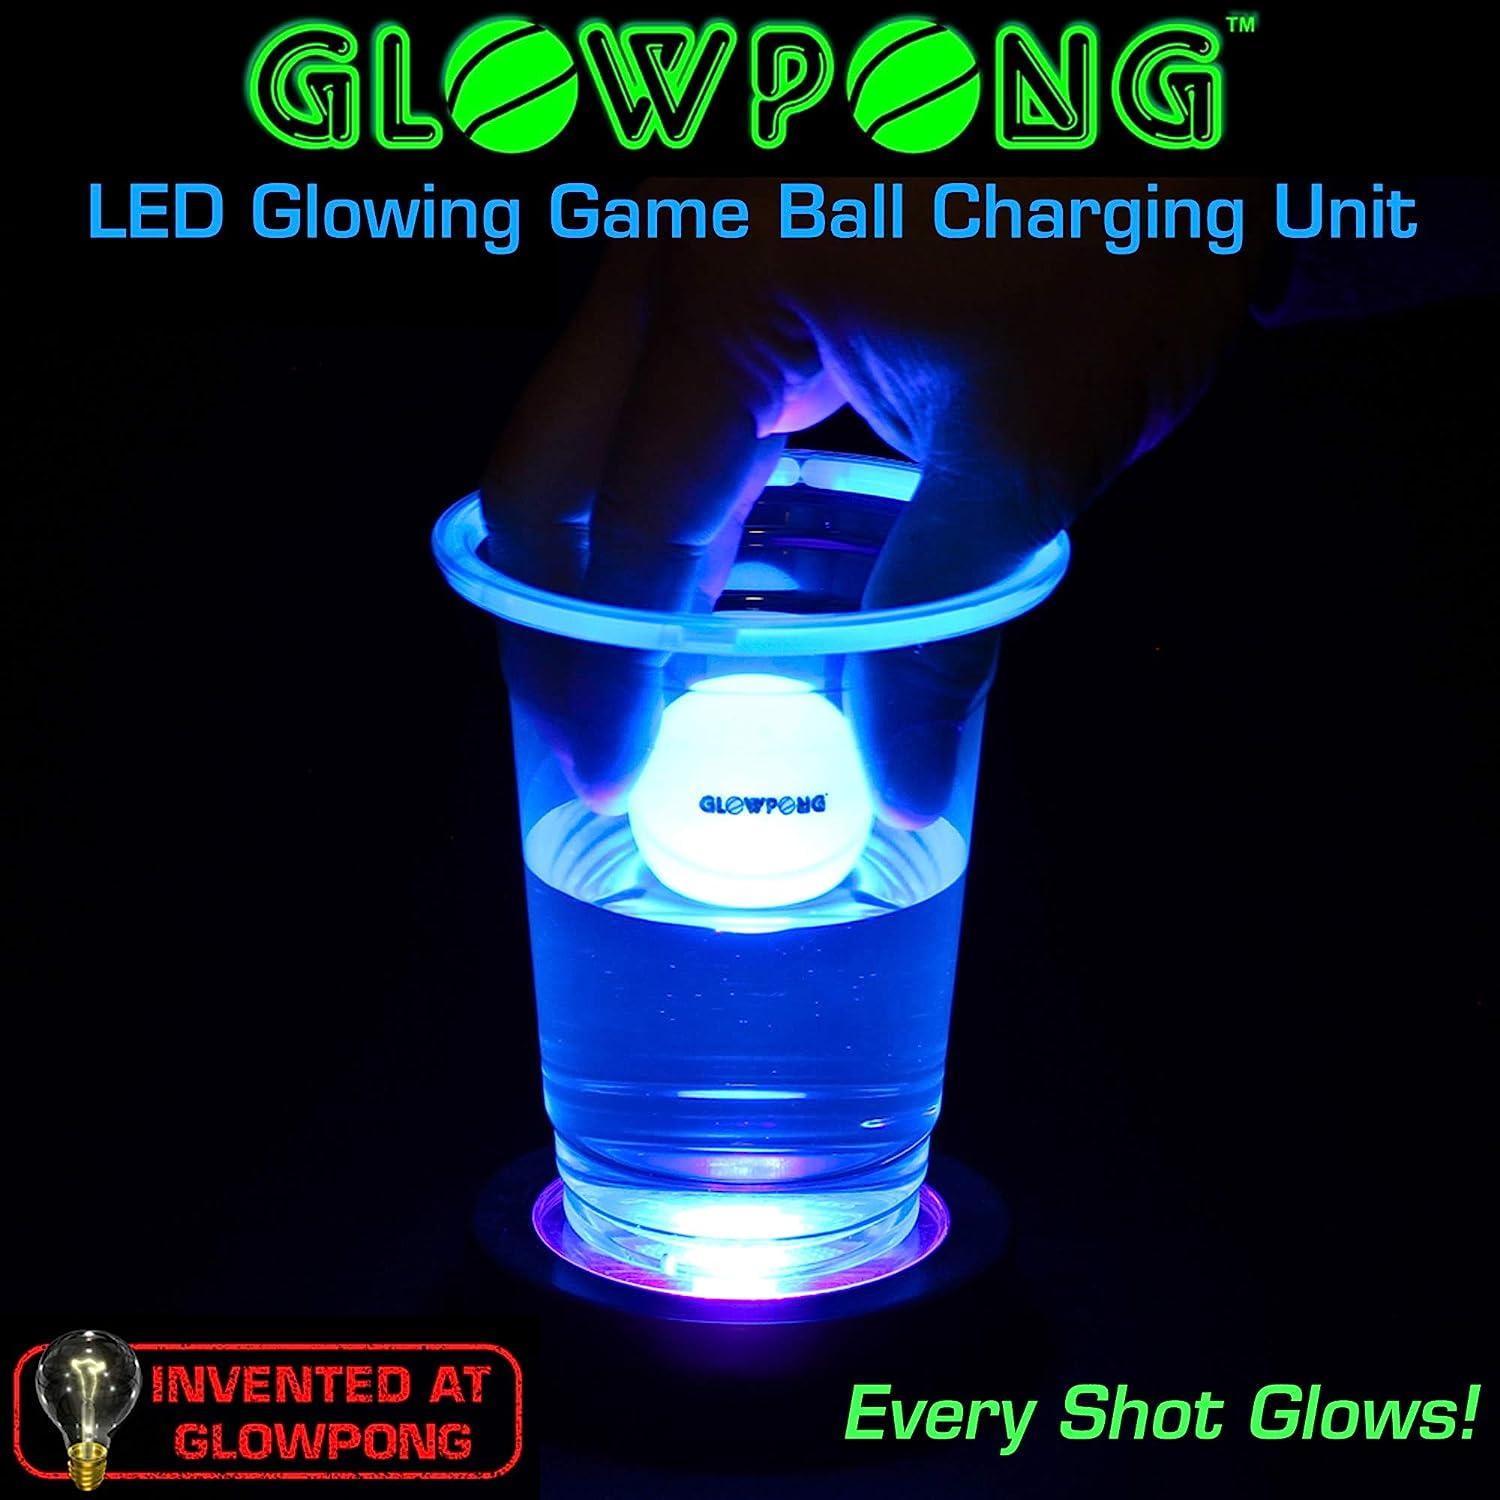 GLOWPONG All Mixed Up Glow-in-The-Dark Beer Pong Game Set for Indoor  Outdoor Nighttime Competitive Fun, 24 Multi-Color Glowing Cups, 4 Glowing  Balls, 1 Ball Charging Unit Makes Every Shot Glow